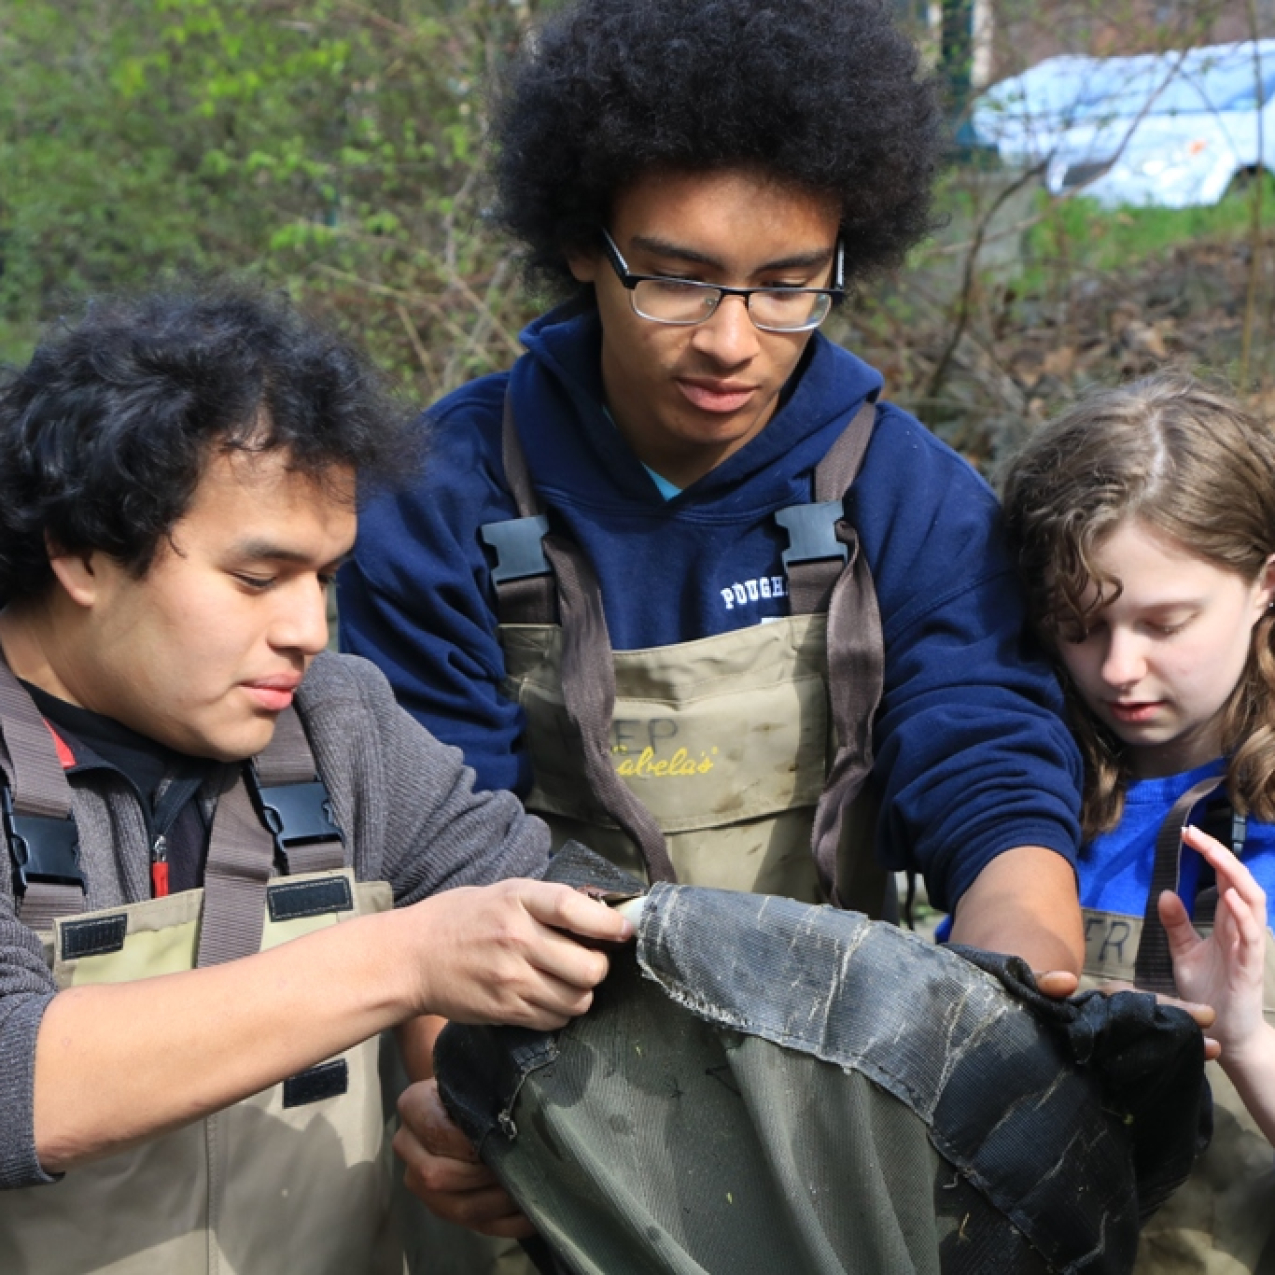 Marist College and Poughkeepsie High School students check a net for migrating juvenile American eels on the Fall Kill Creek on New York's Hudson River estuary.